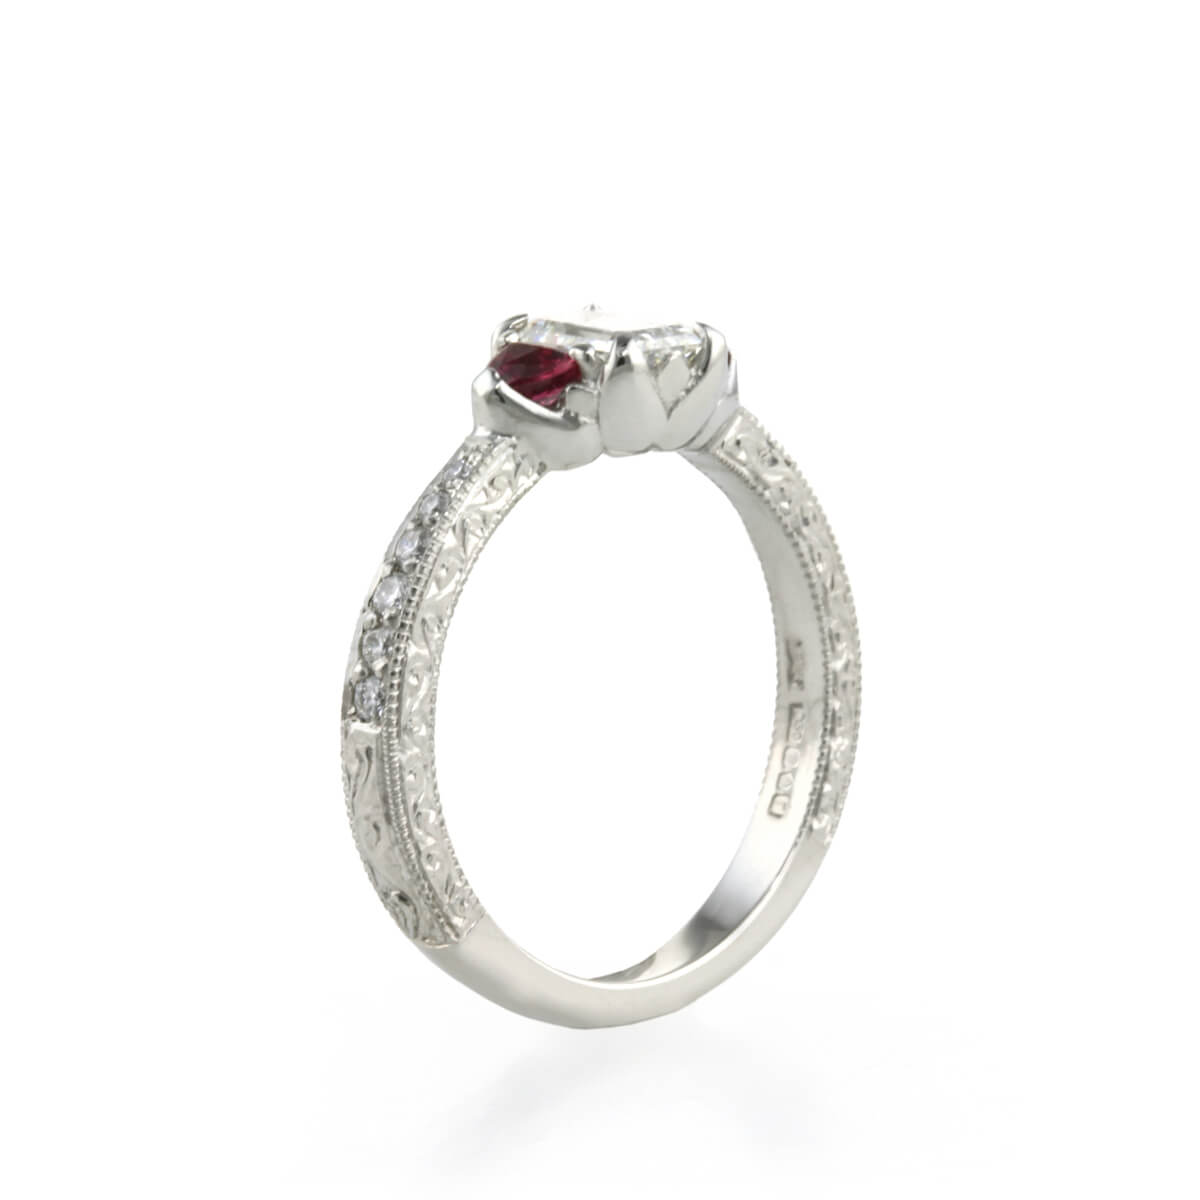 Platinum lotus flower engagement ring set with diamonds and rubies